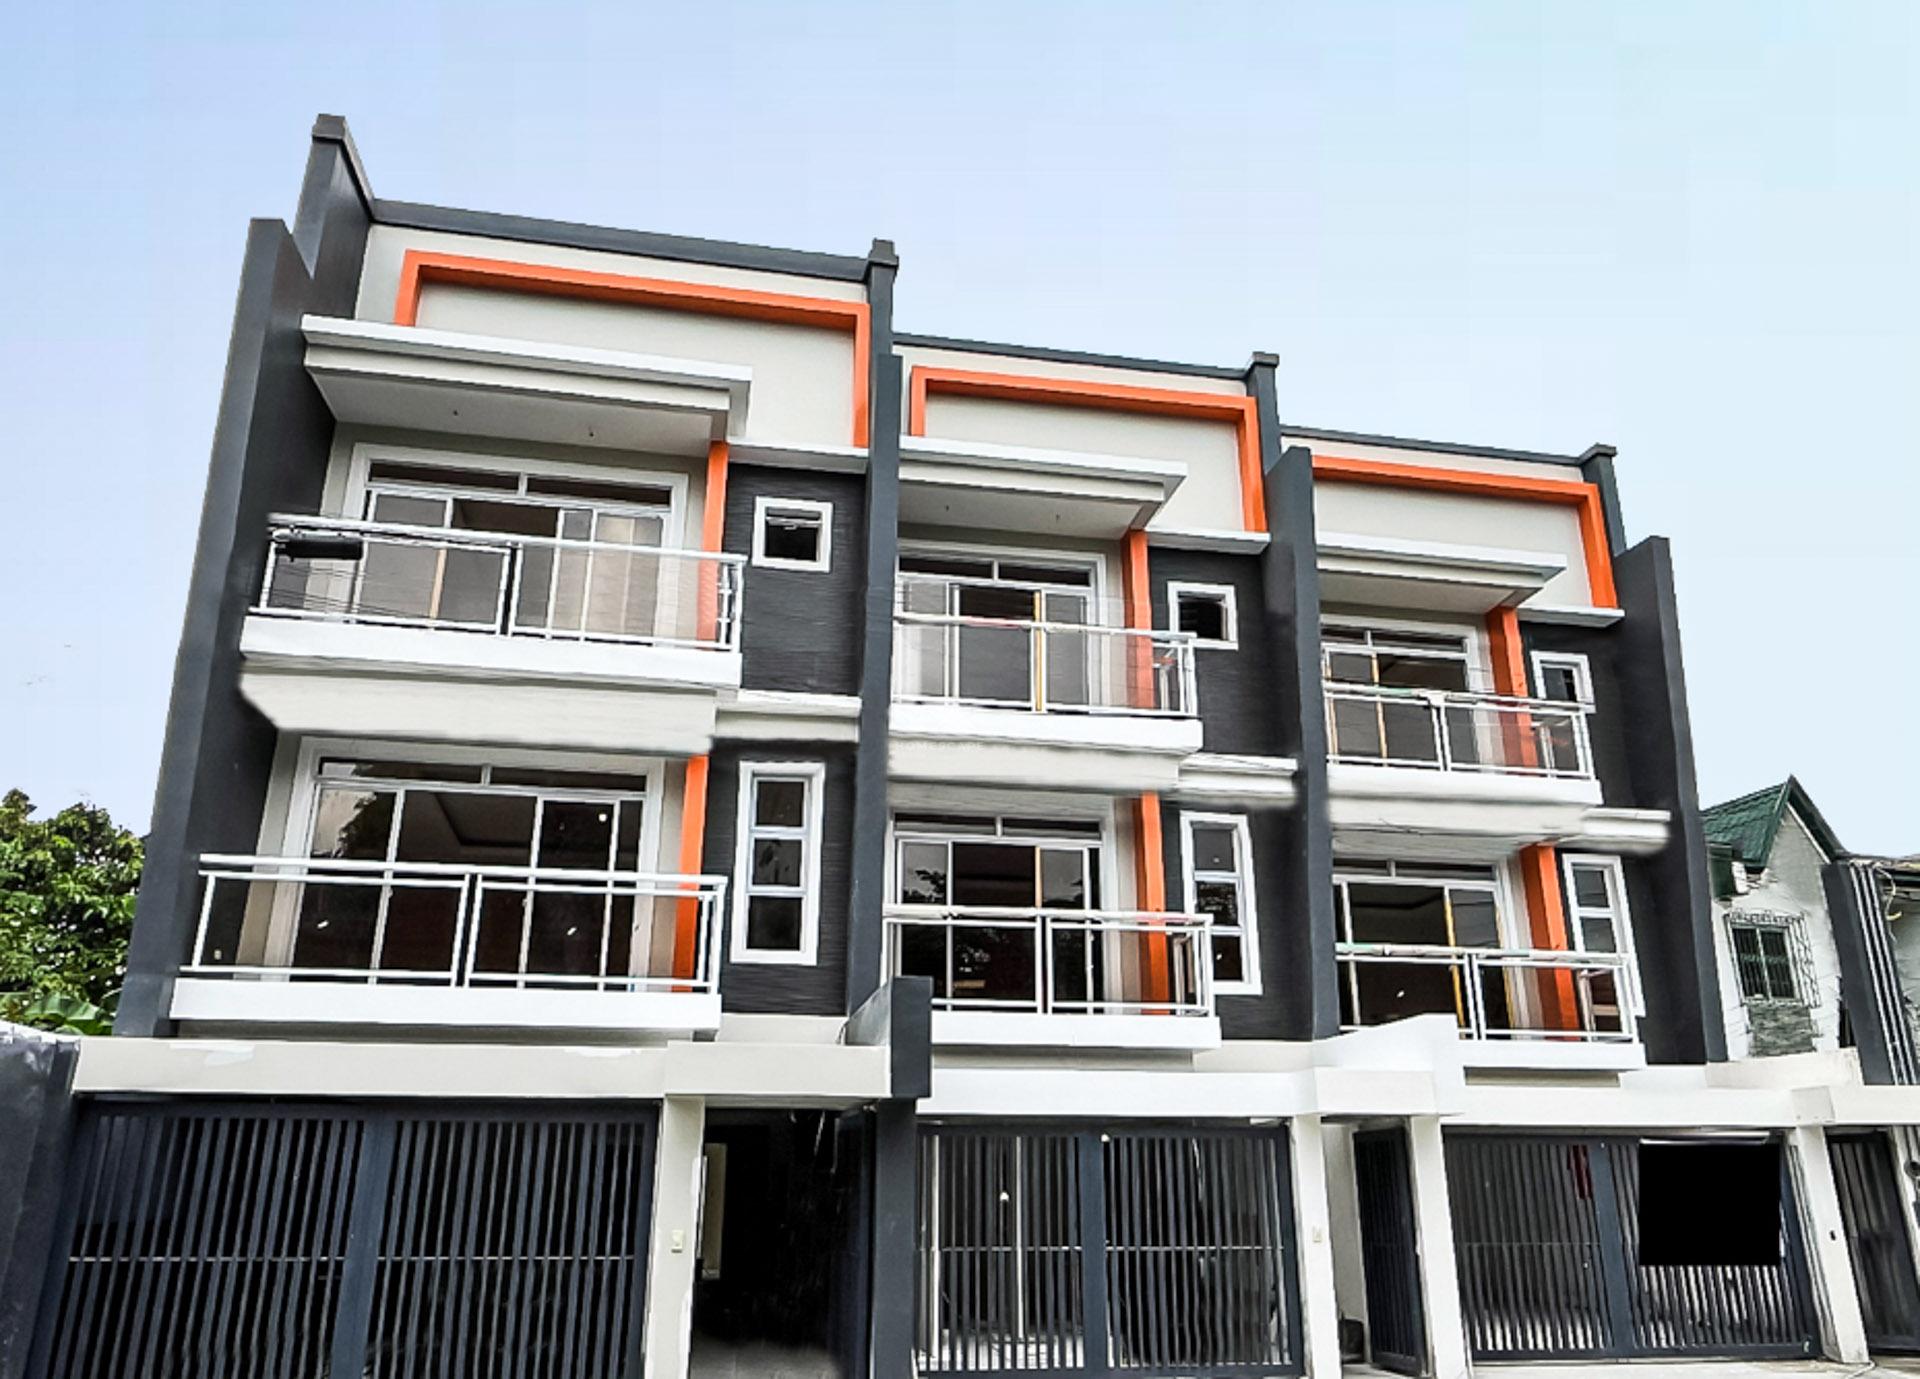 Notable Brand New Townhouse For Sale in Don Antonio Heights, Quezon City